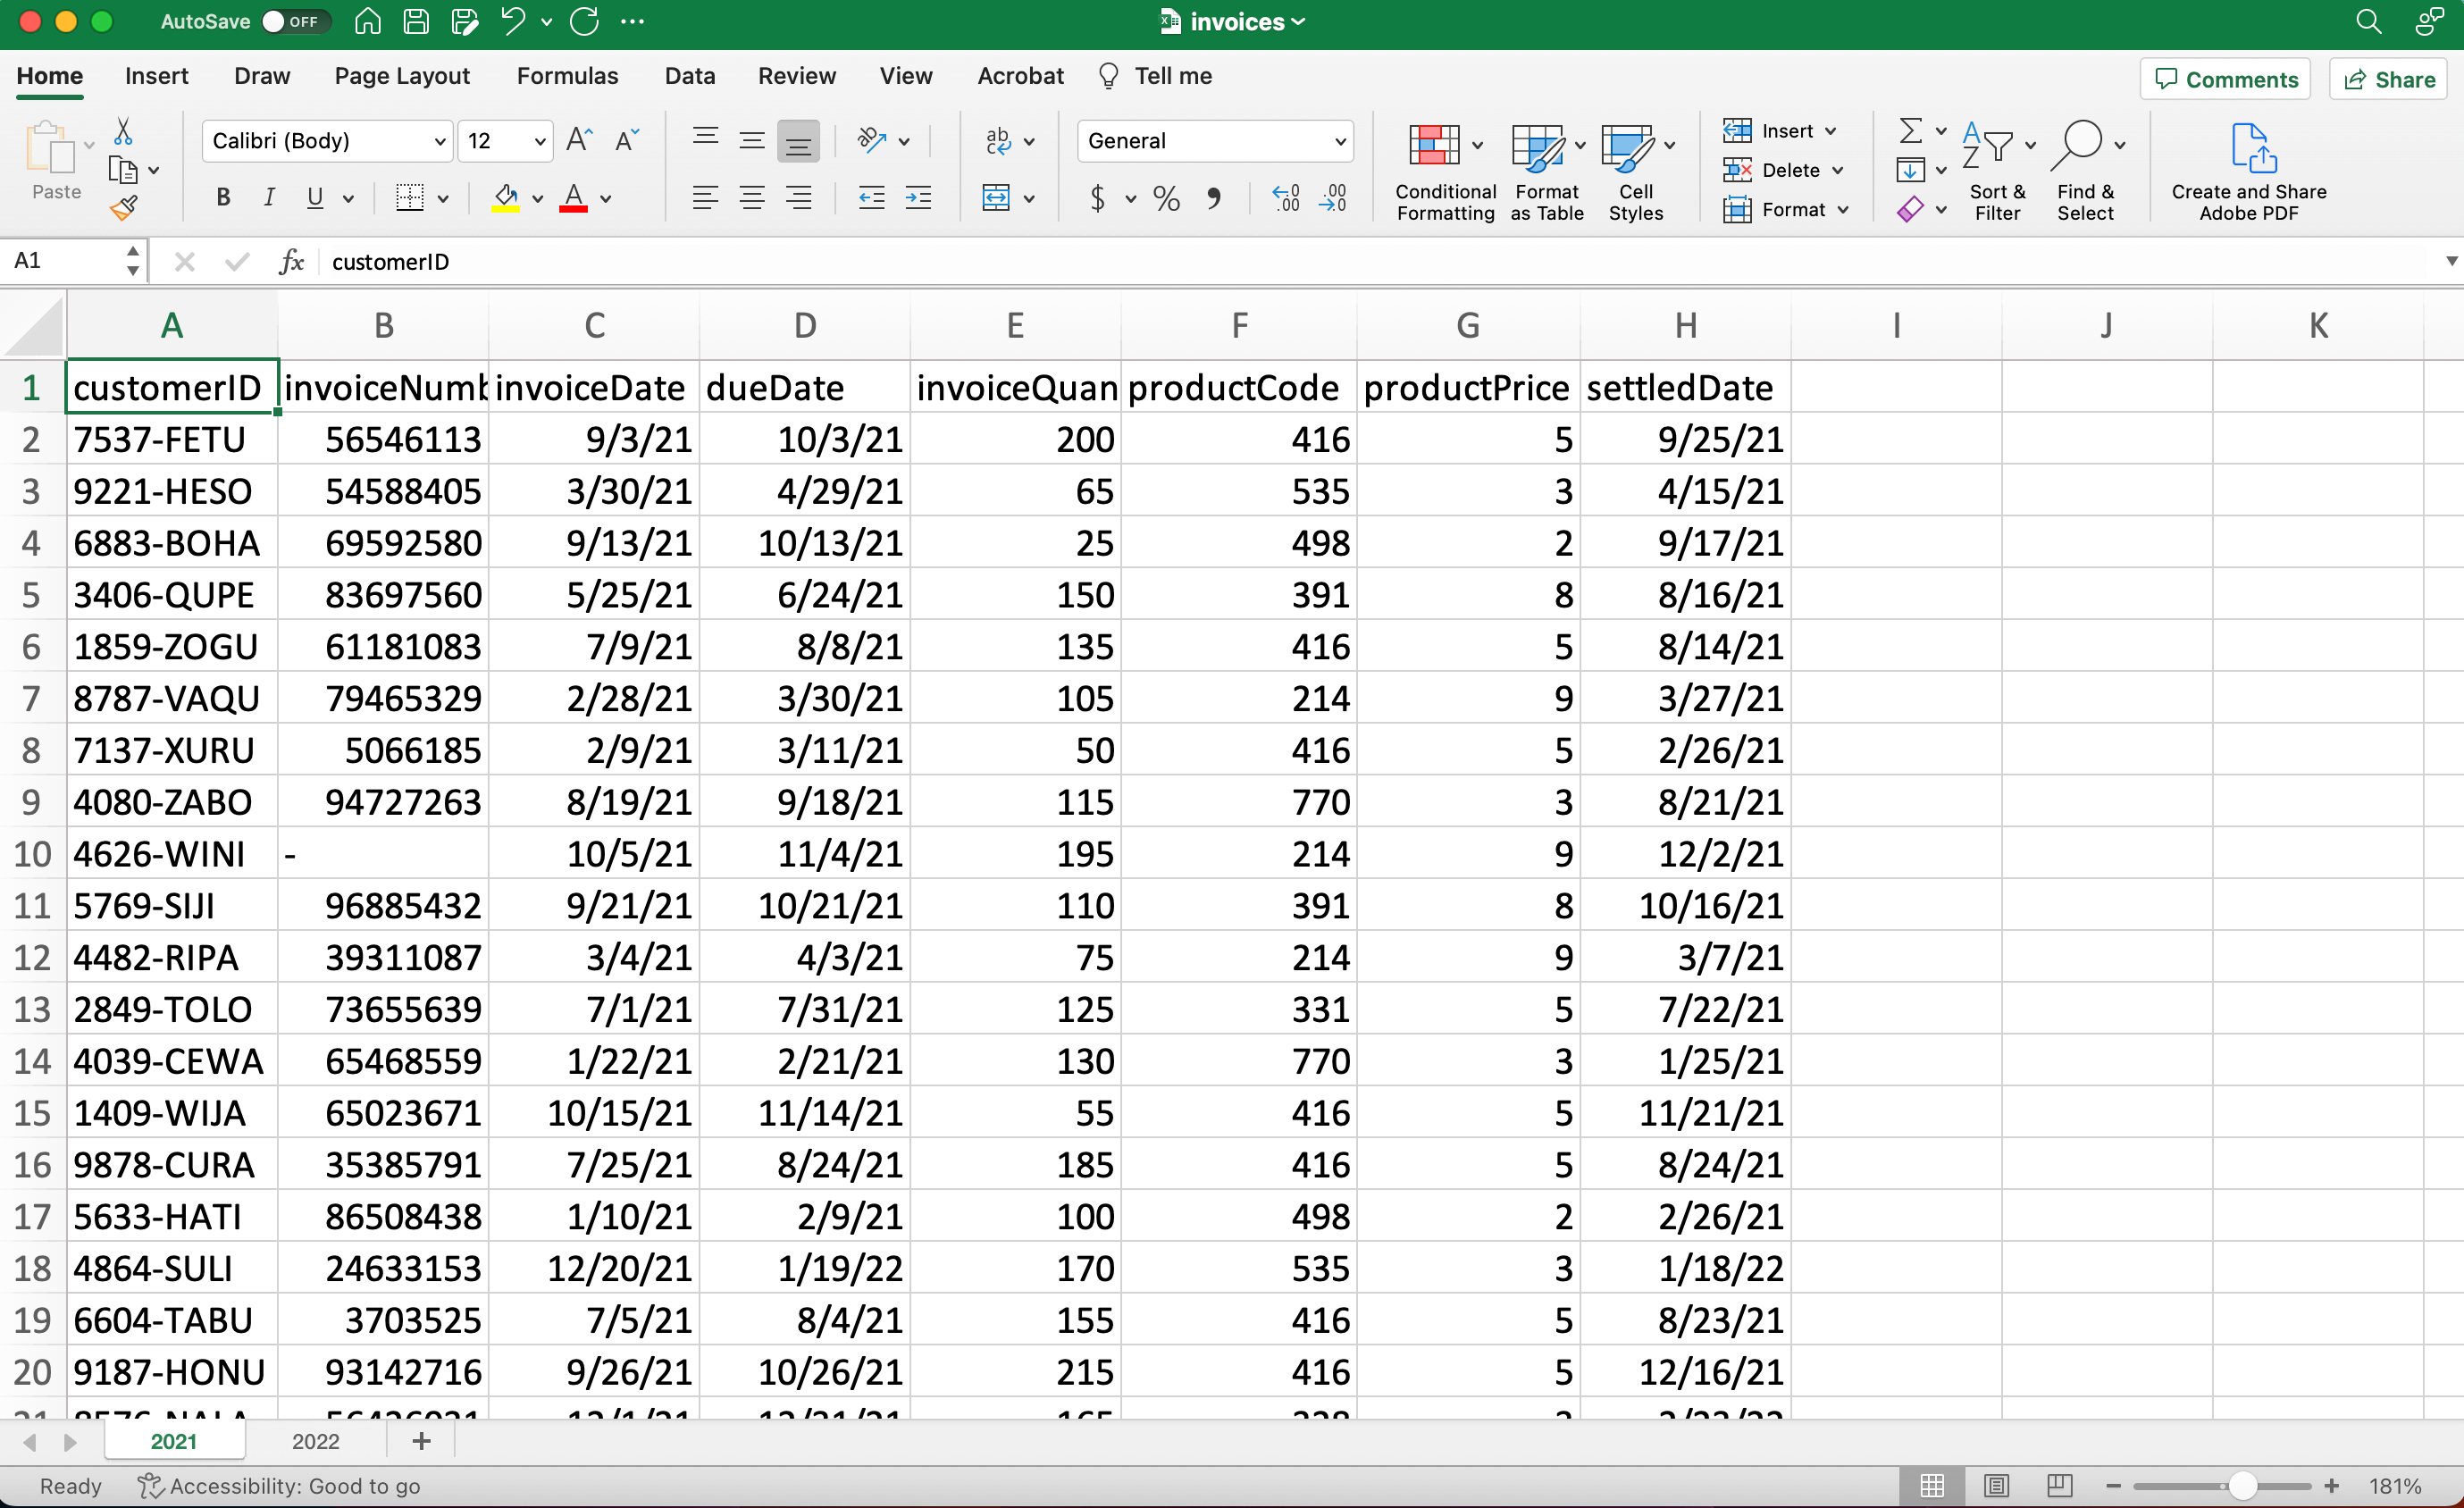 Excel screenshot of the invoices file with two sheets.